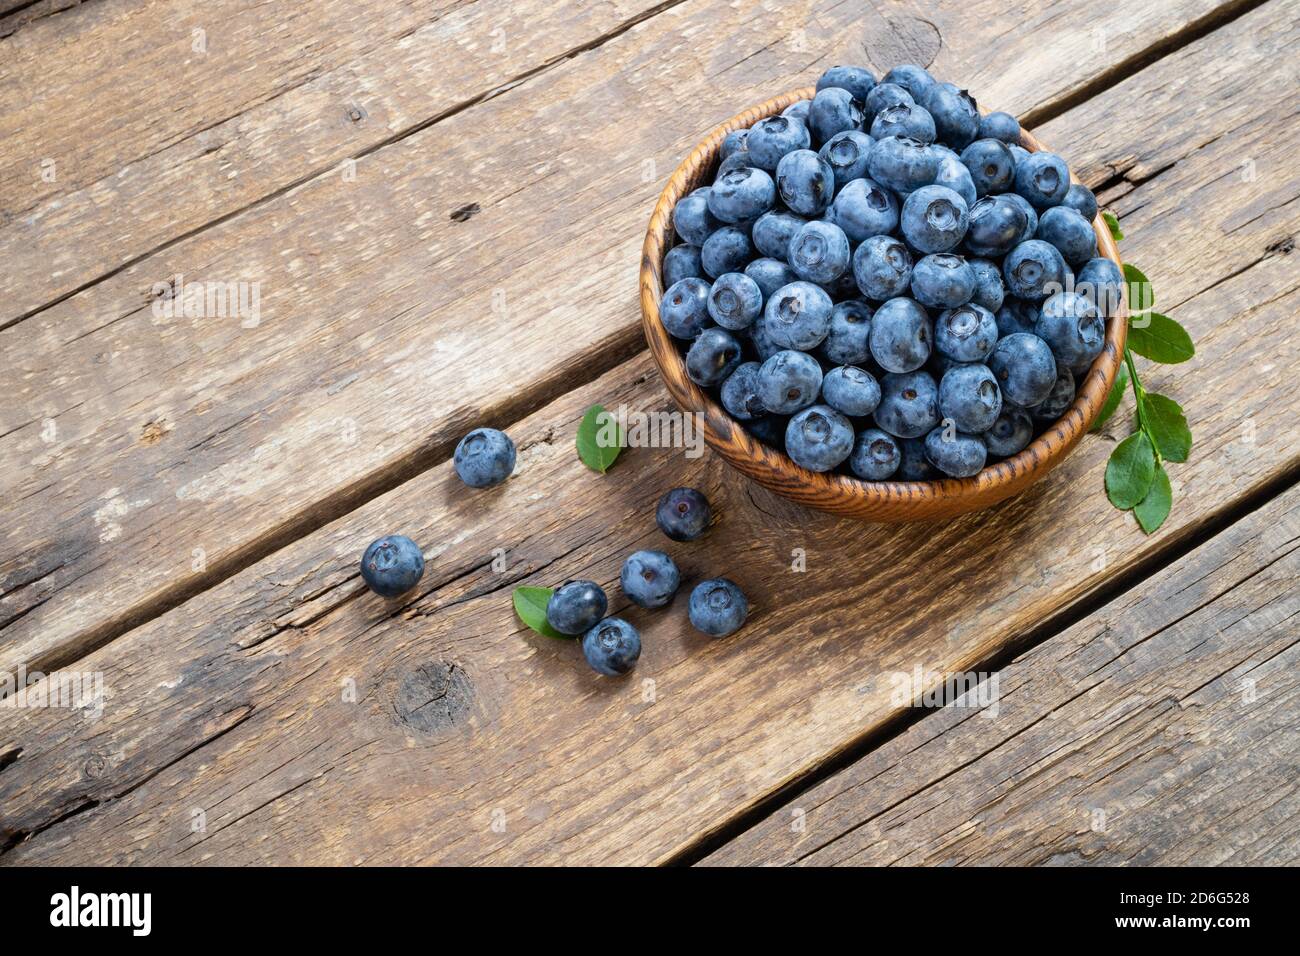 Fresh blueberry in wooden bowl. Juicy and fresh blueberries with green leaves on rustic table. Concept blueberry antioxidant for healthy eating and nu Stock Photo